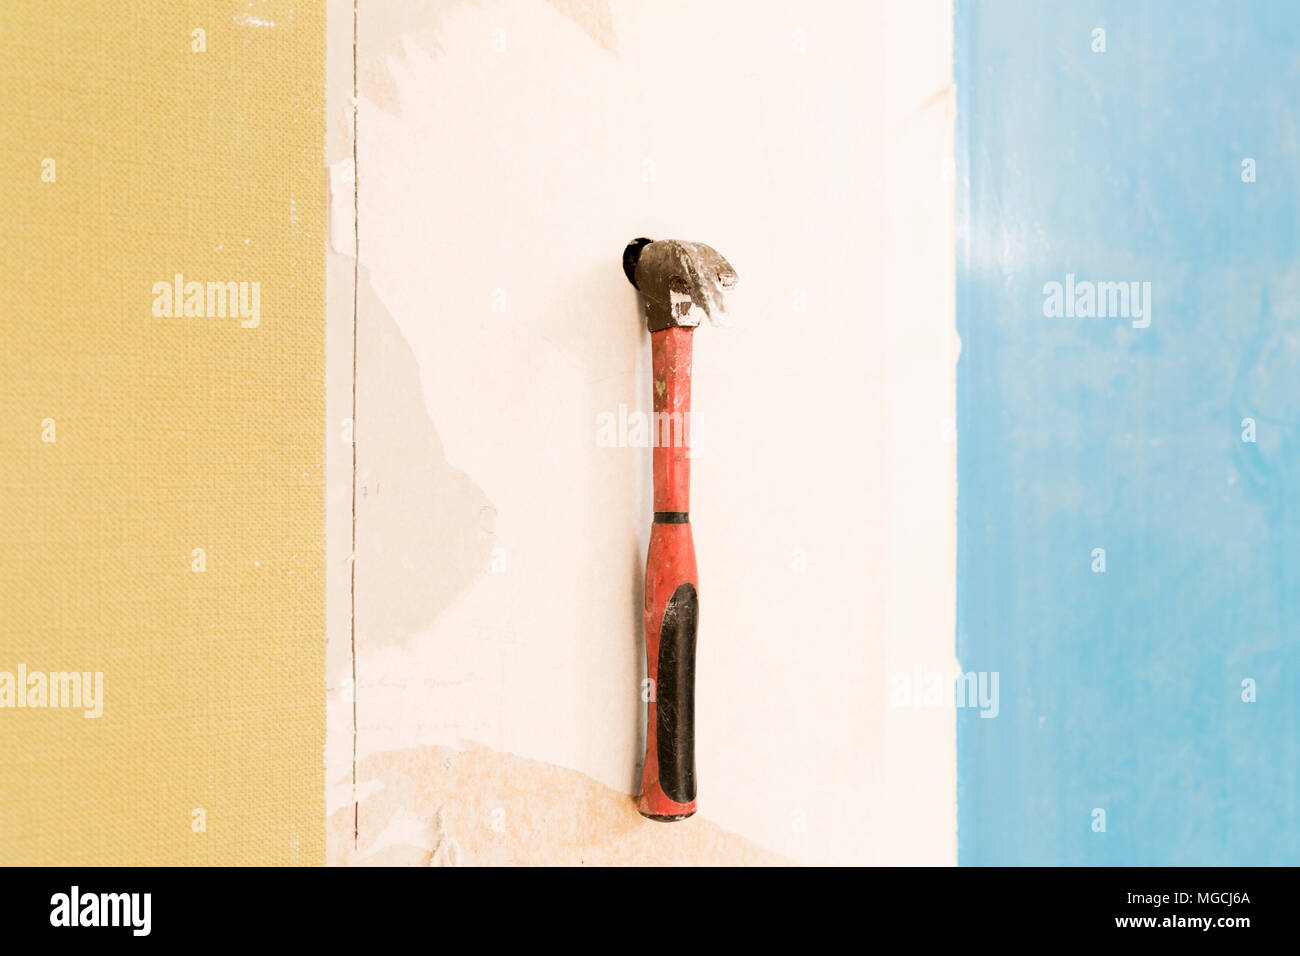 Builder hitting a wall with a hammer. Home renovation concept. Break wall to make new Stock Photo